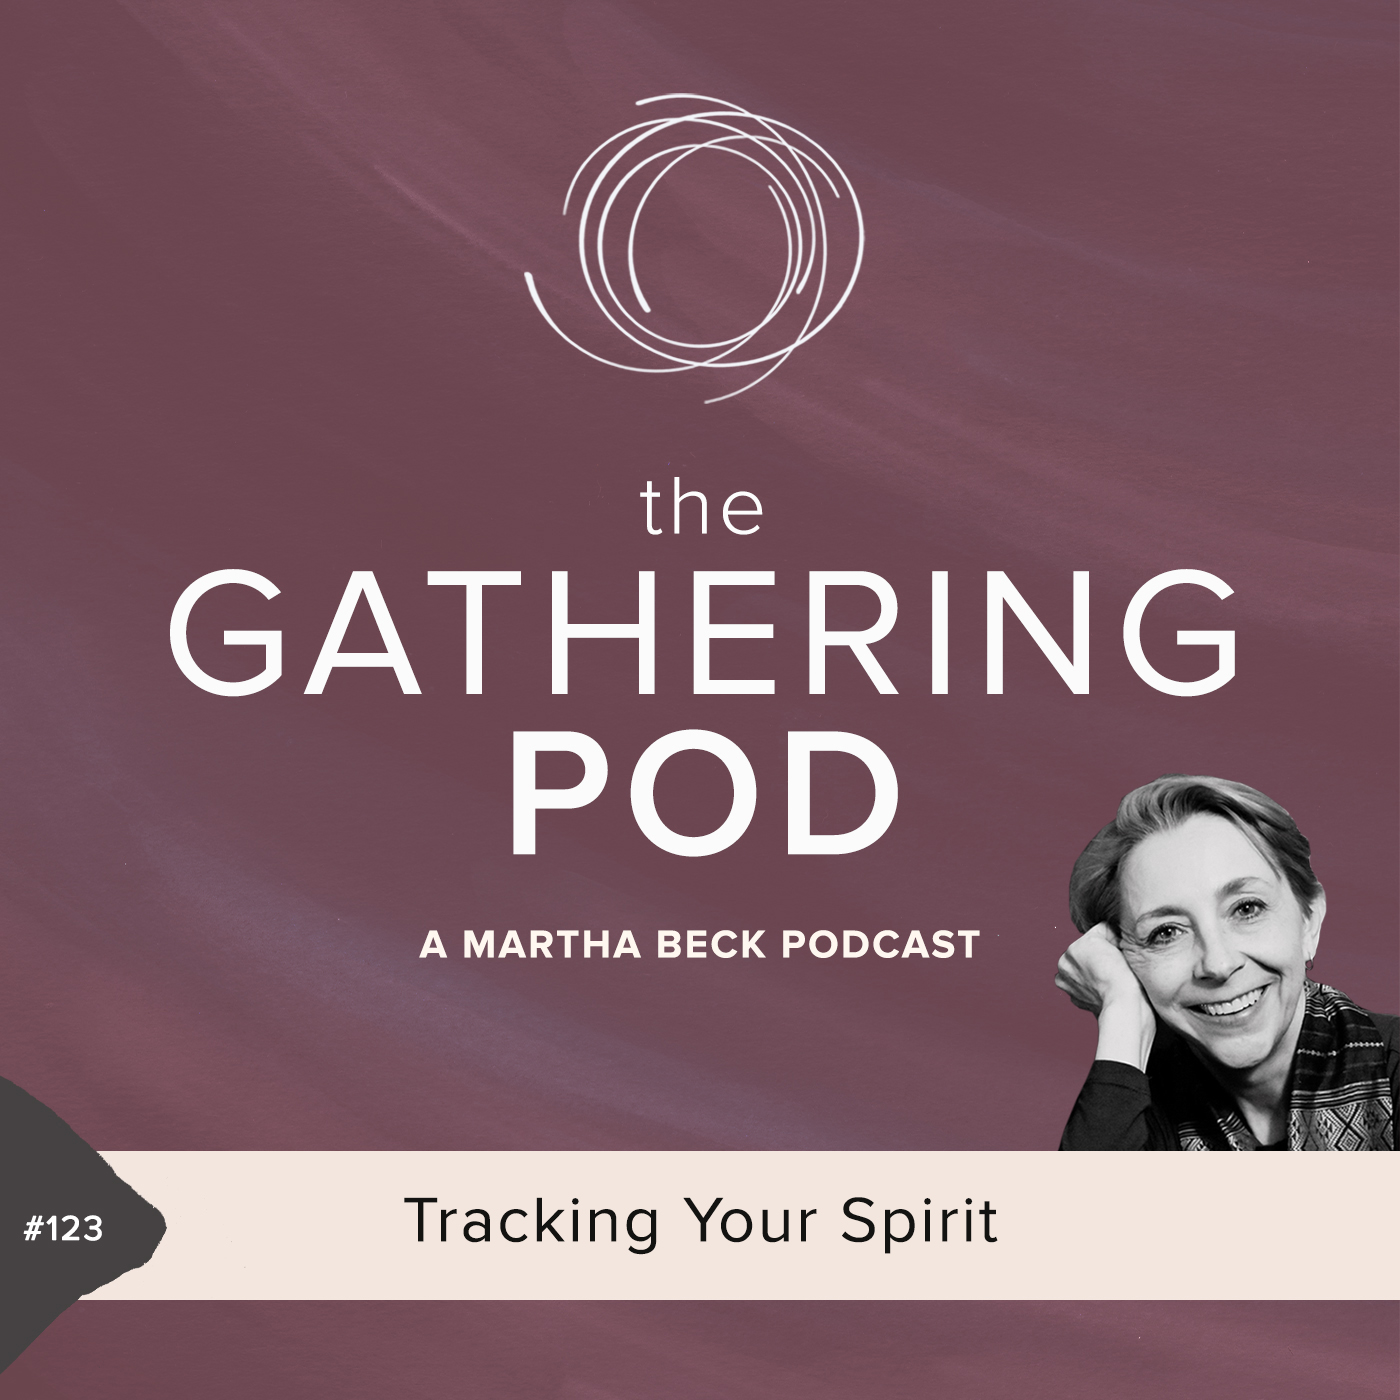 Image for The Gathering Pod A Martha Beck Podcast Episode #123 Tracking Your Spirit